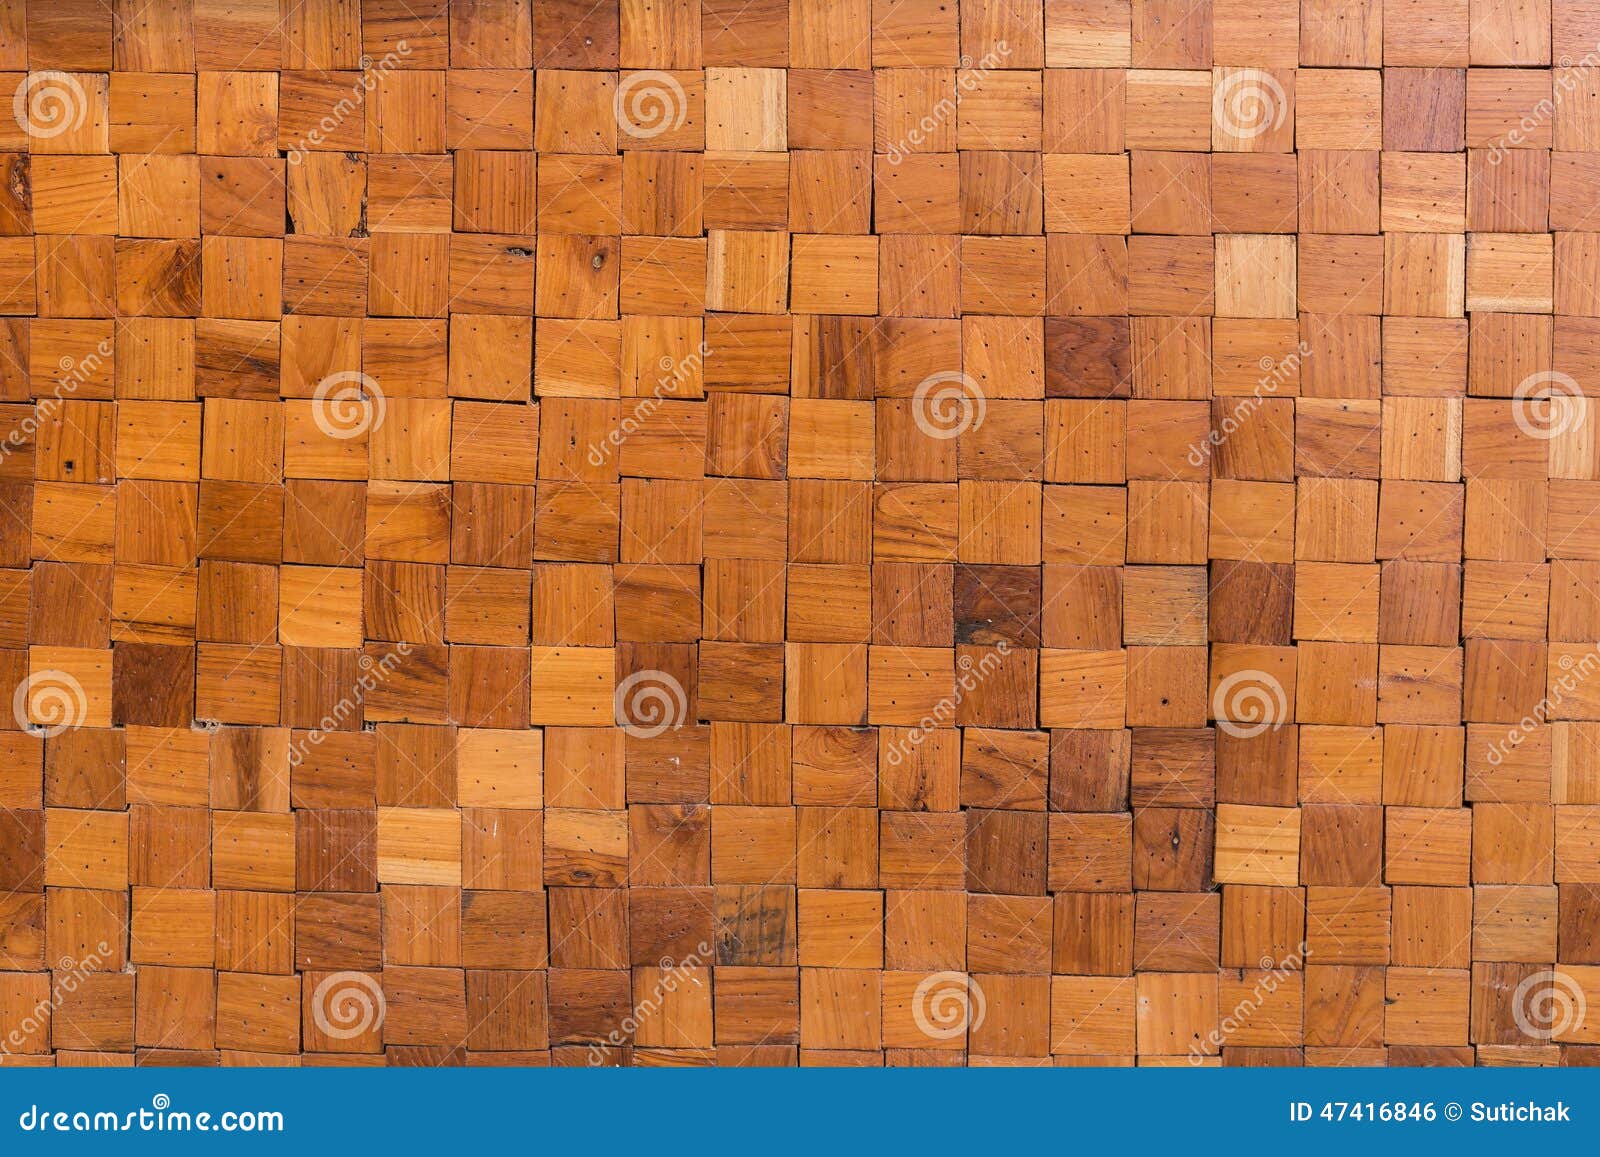 Creative Idea For The Background. Wooden Cubes With A Slice Of Wood Texture  Stock Photo, Picture and Royalty Free Image. Image 152866135.